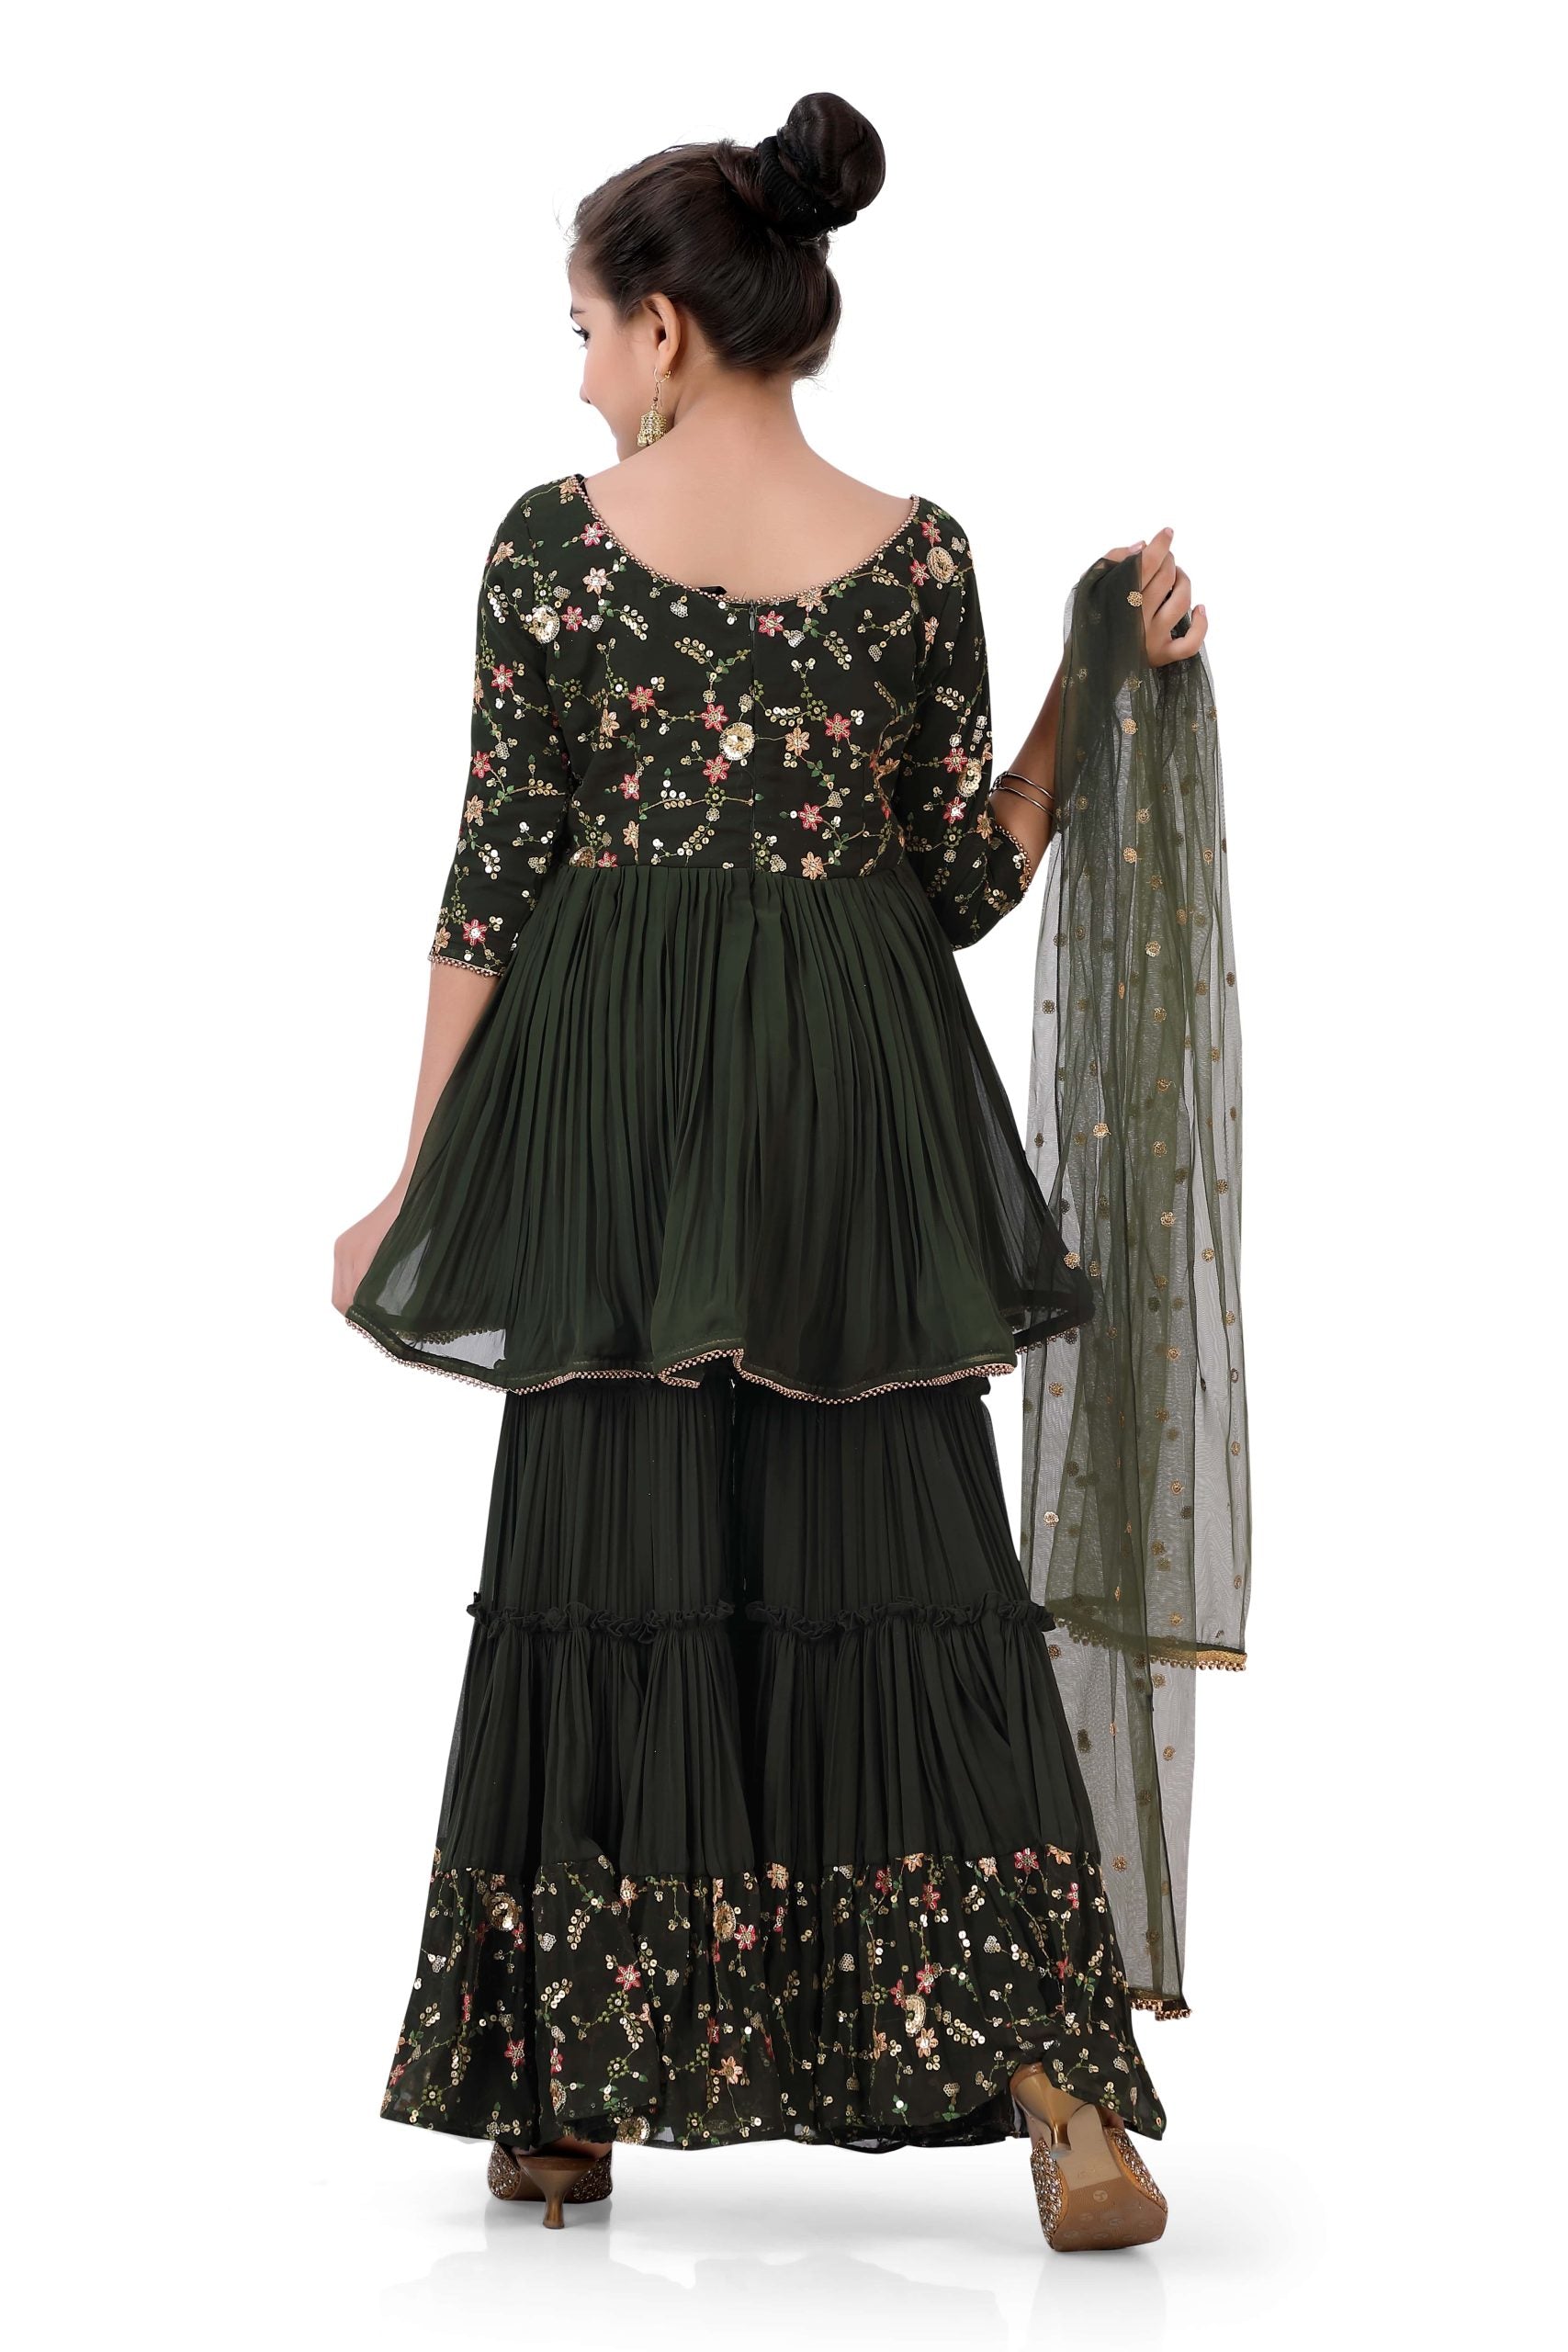 Girl's Sharara Suit in Mehendi Green with embroidery